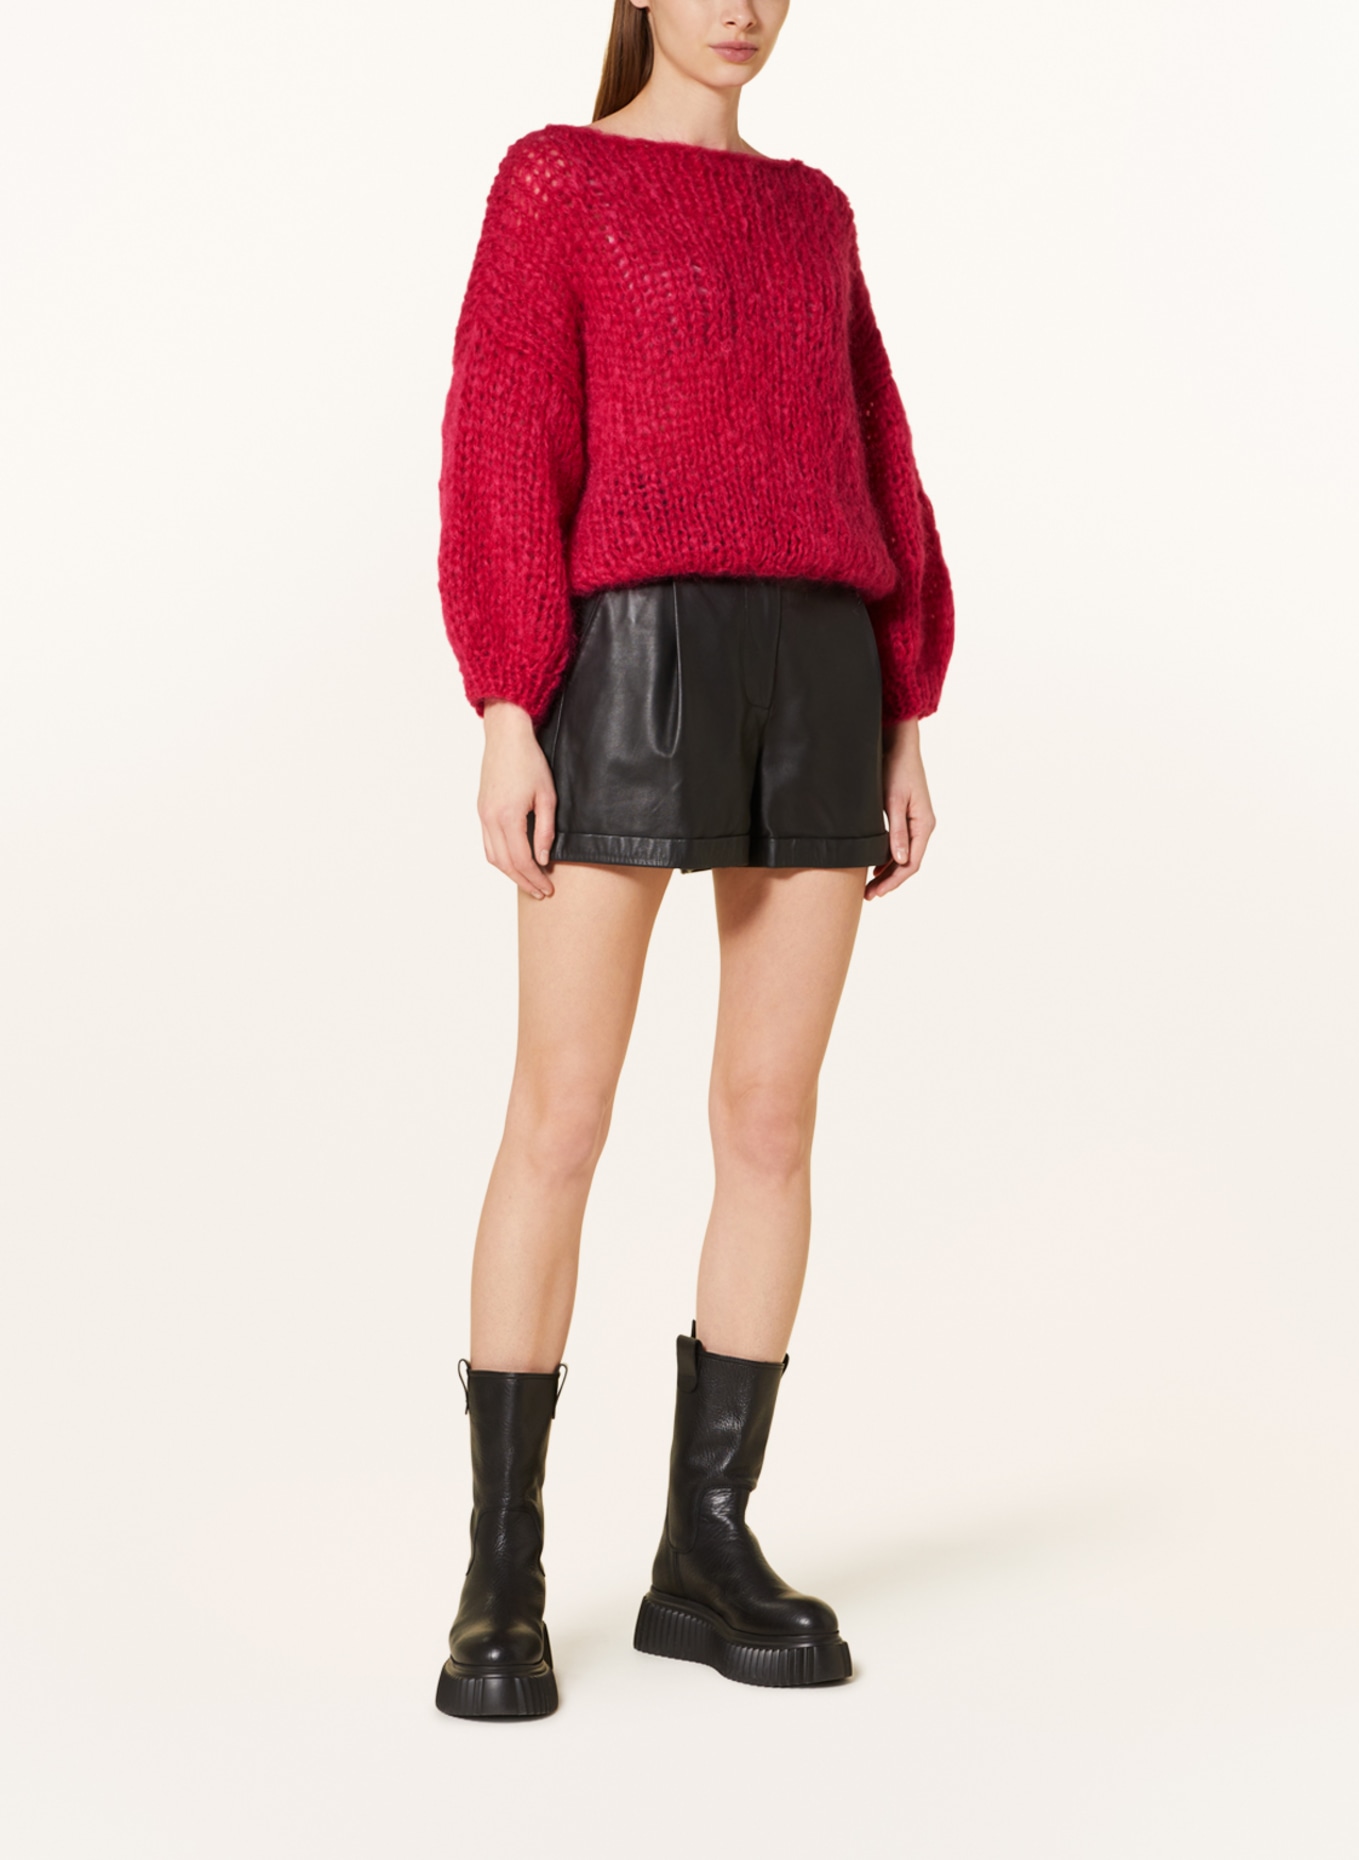 MAIAMI Oversized sweater made of mohair, Color: FUCHSIA (Image 2)